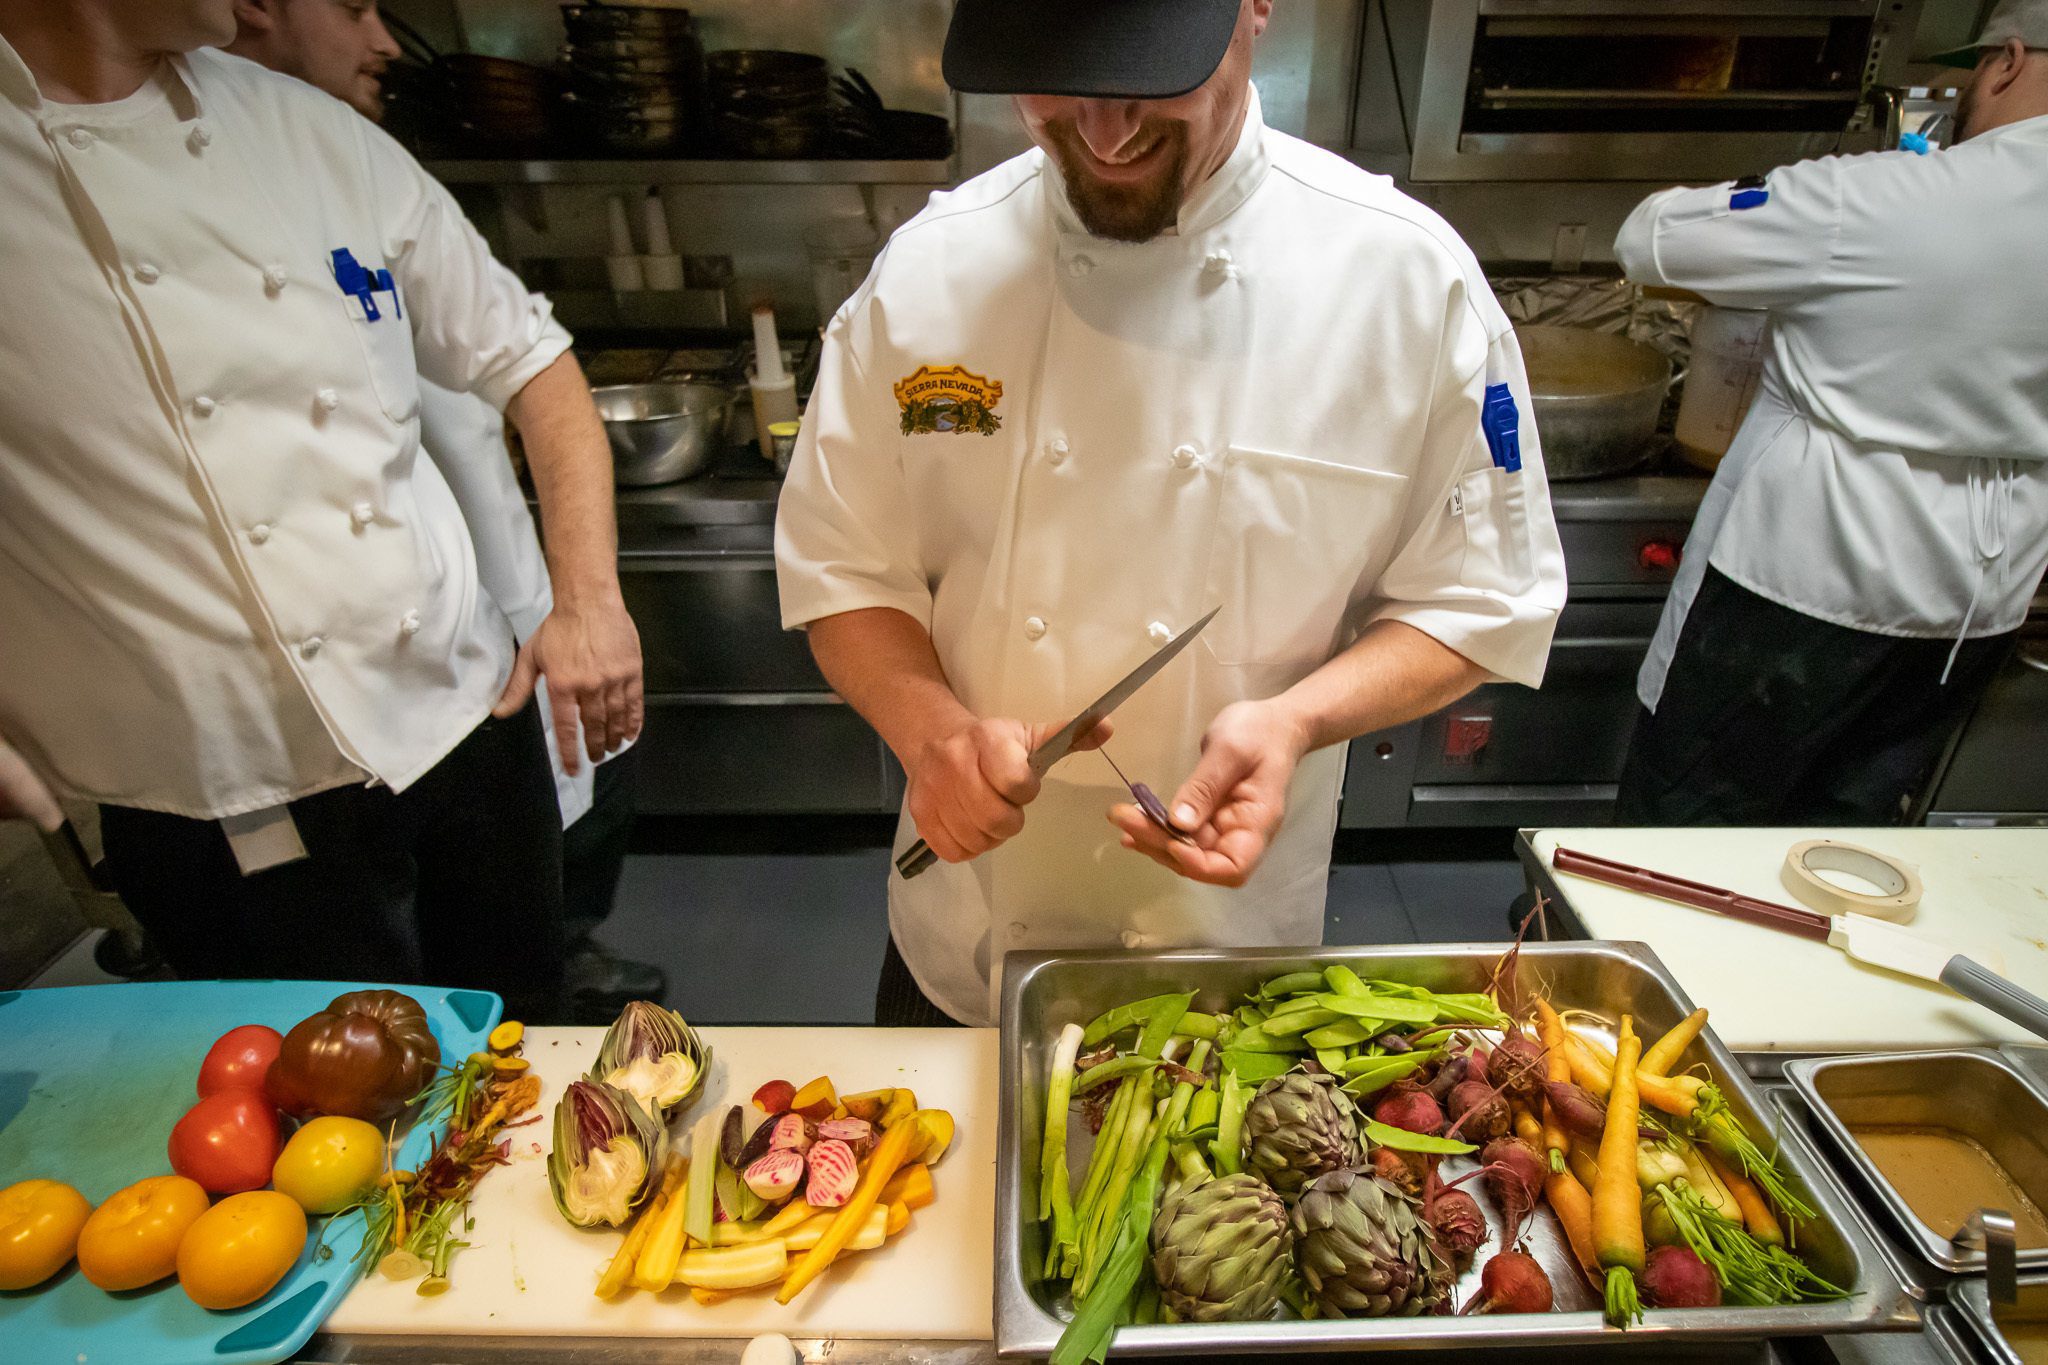 Sierra Nevada Brewing Company chef cutting vegetables in kitchen